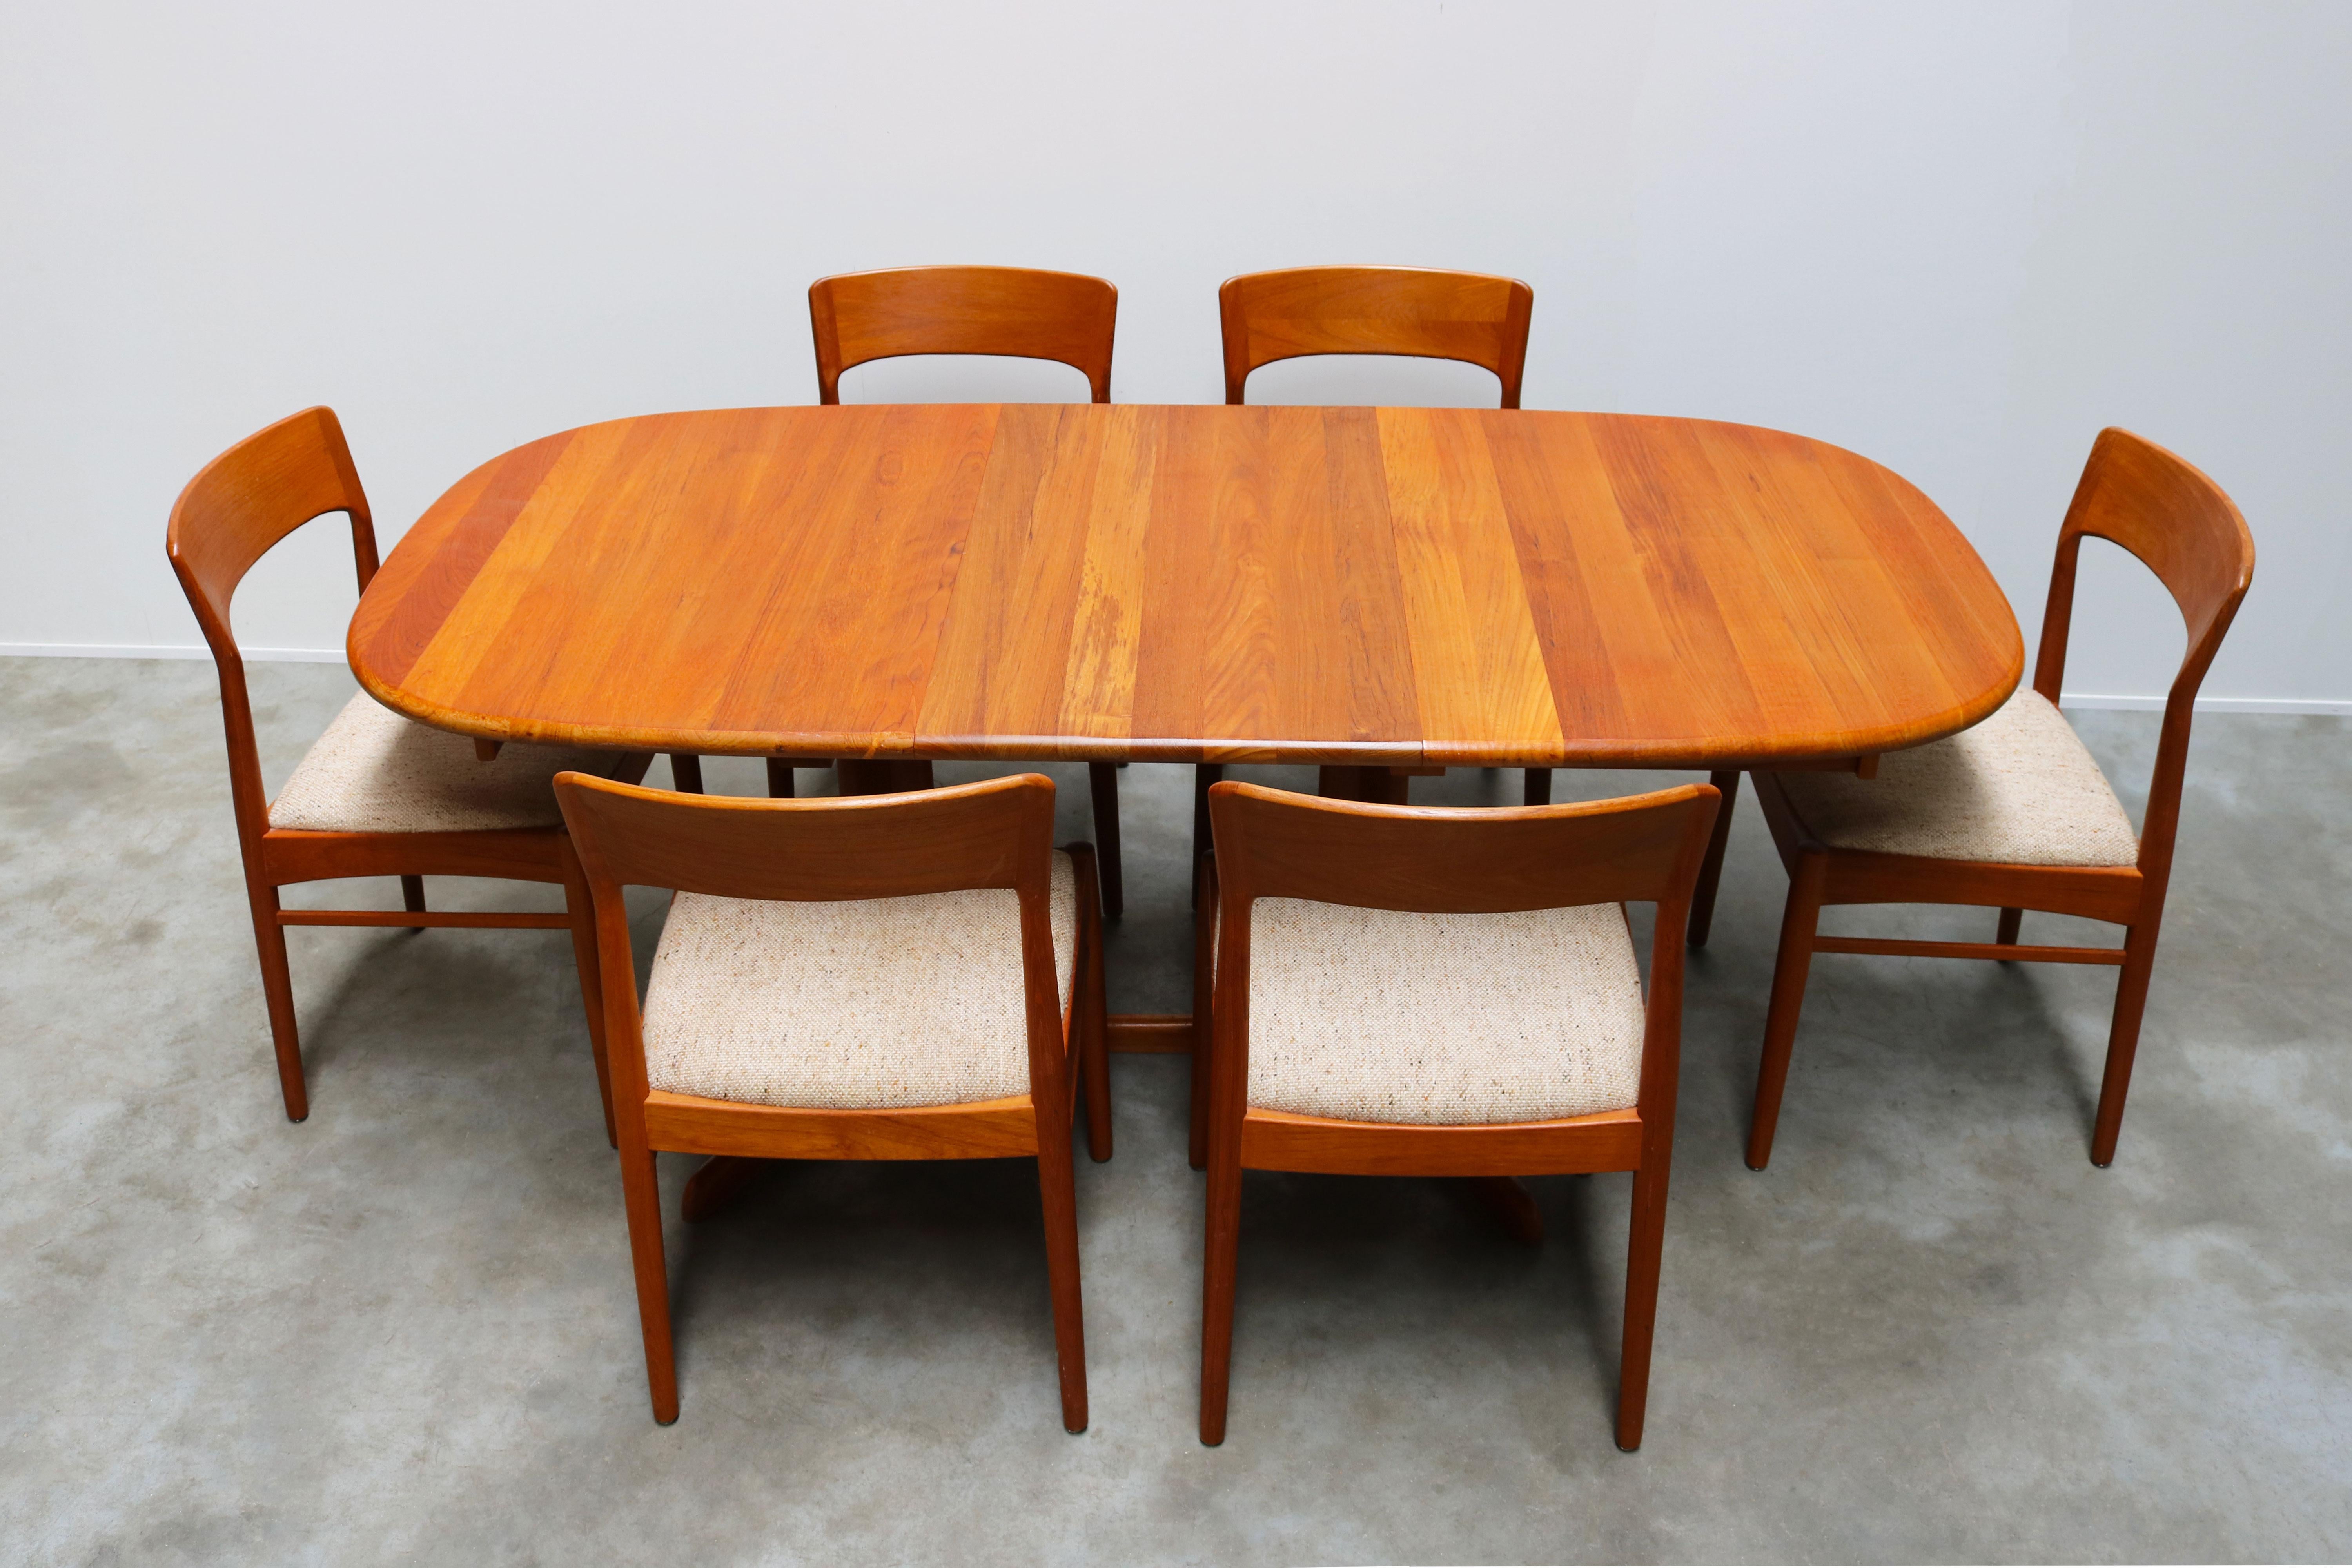 Gorgeous and fully original Danish design dining room set designed by Kai Kristiansen for the Korup Stolefabrik in the 1950s.
The table and chairs are made out of solid Teak and look simply stunning.
High quality set which consists of:
6 solid